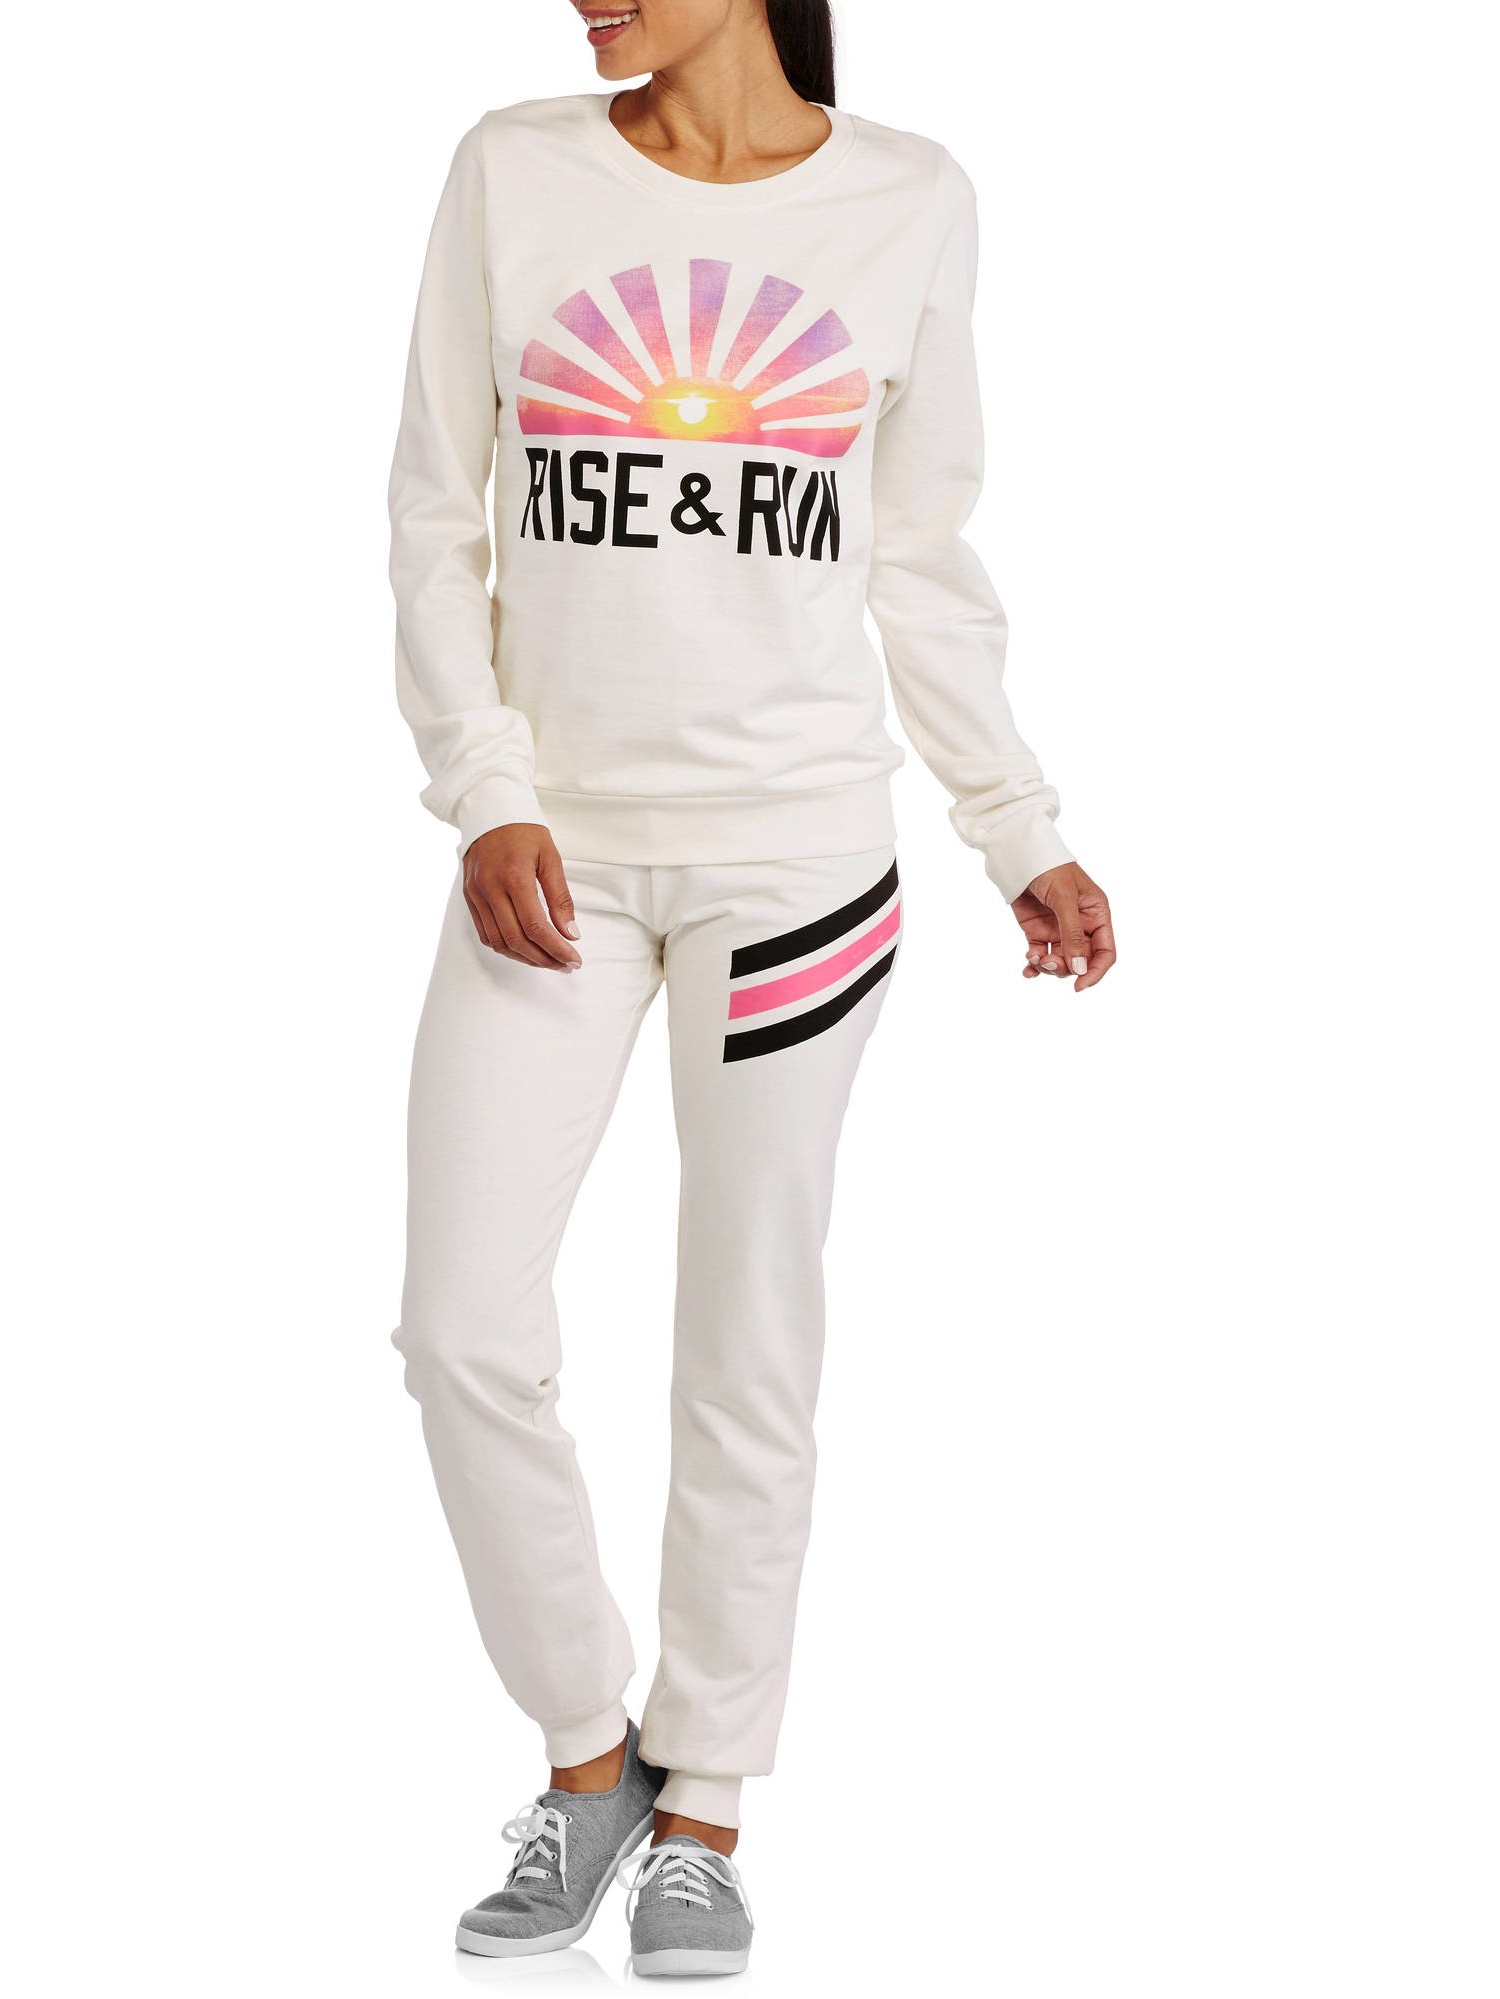 Women's French Terry Graphic Pullover and Jogger Pants Set - image 1 of 2